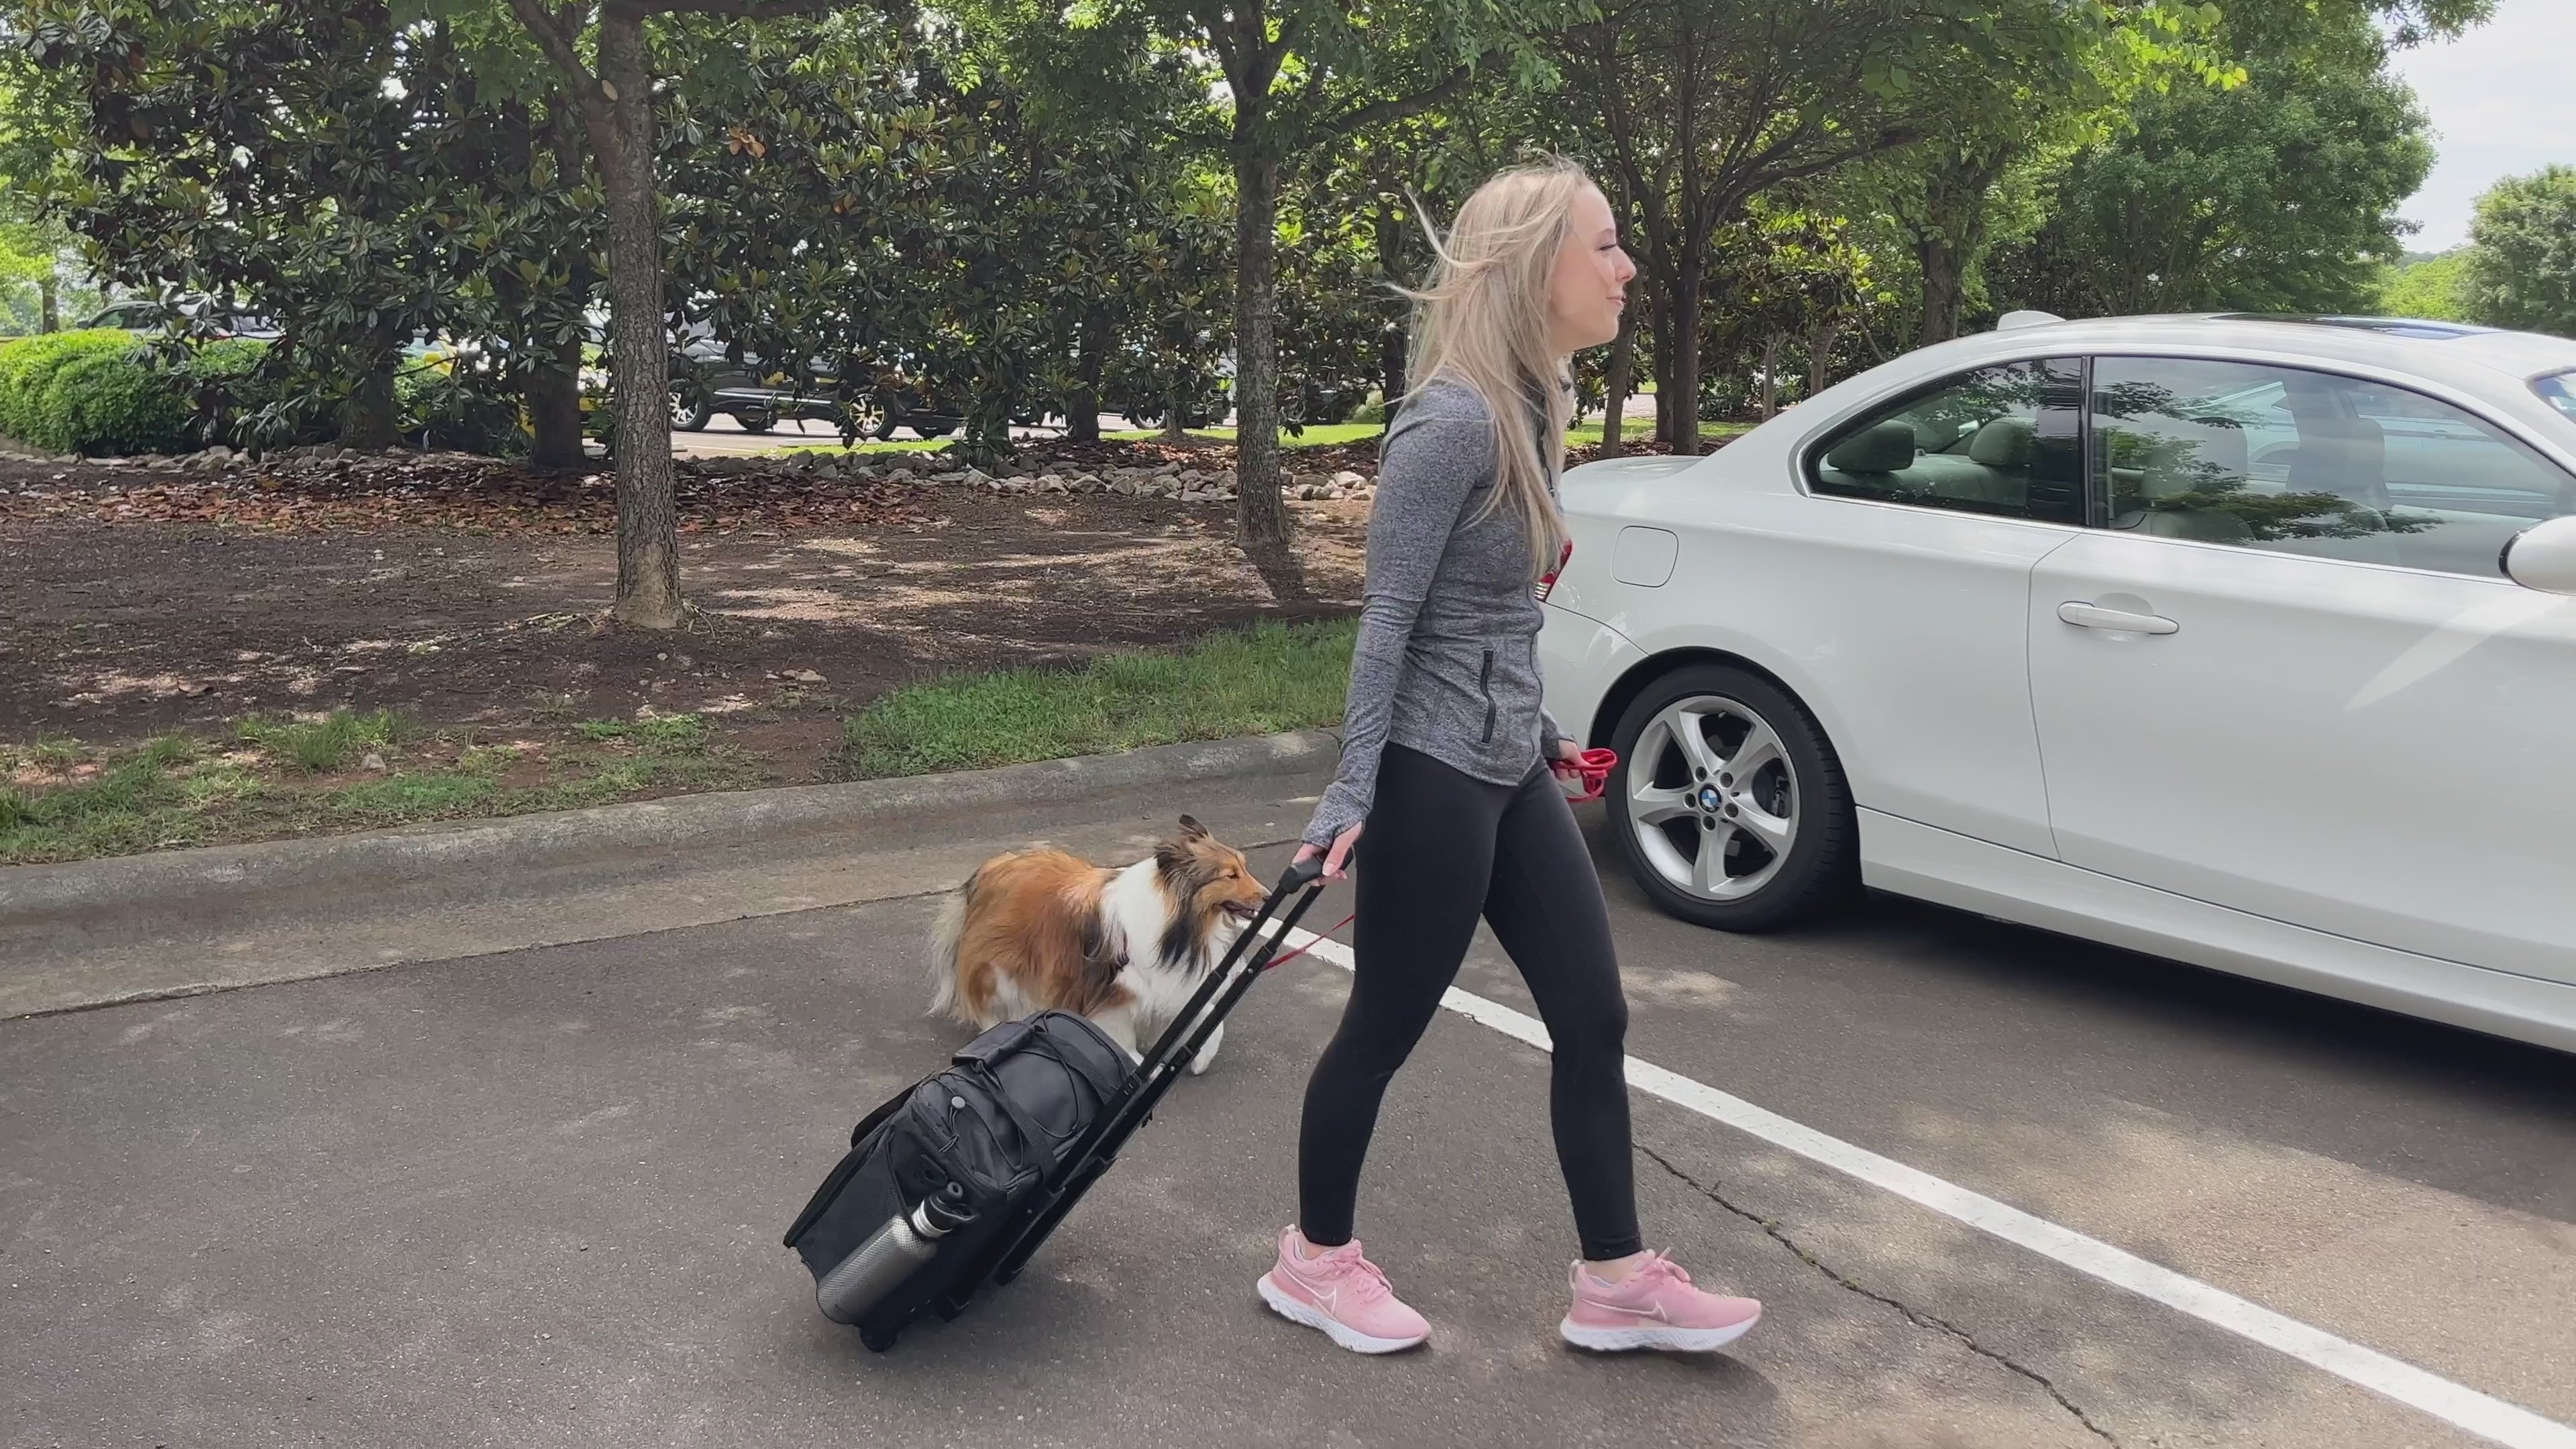 Load video: Hear why Mobile Dog Gear is the Best in Pet Luggage. As told by NewsWatch TV